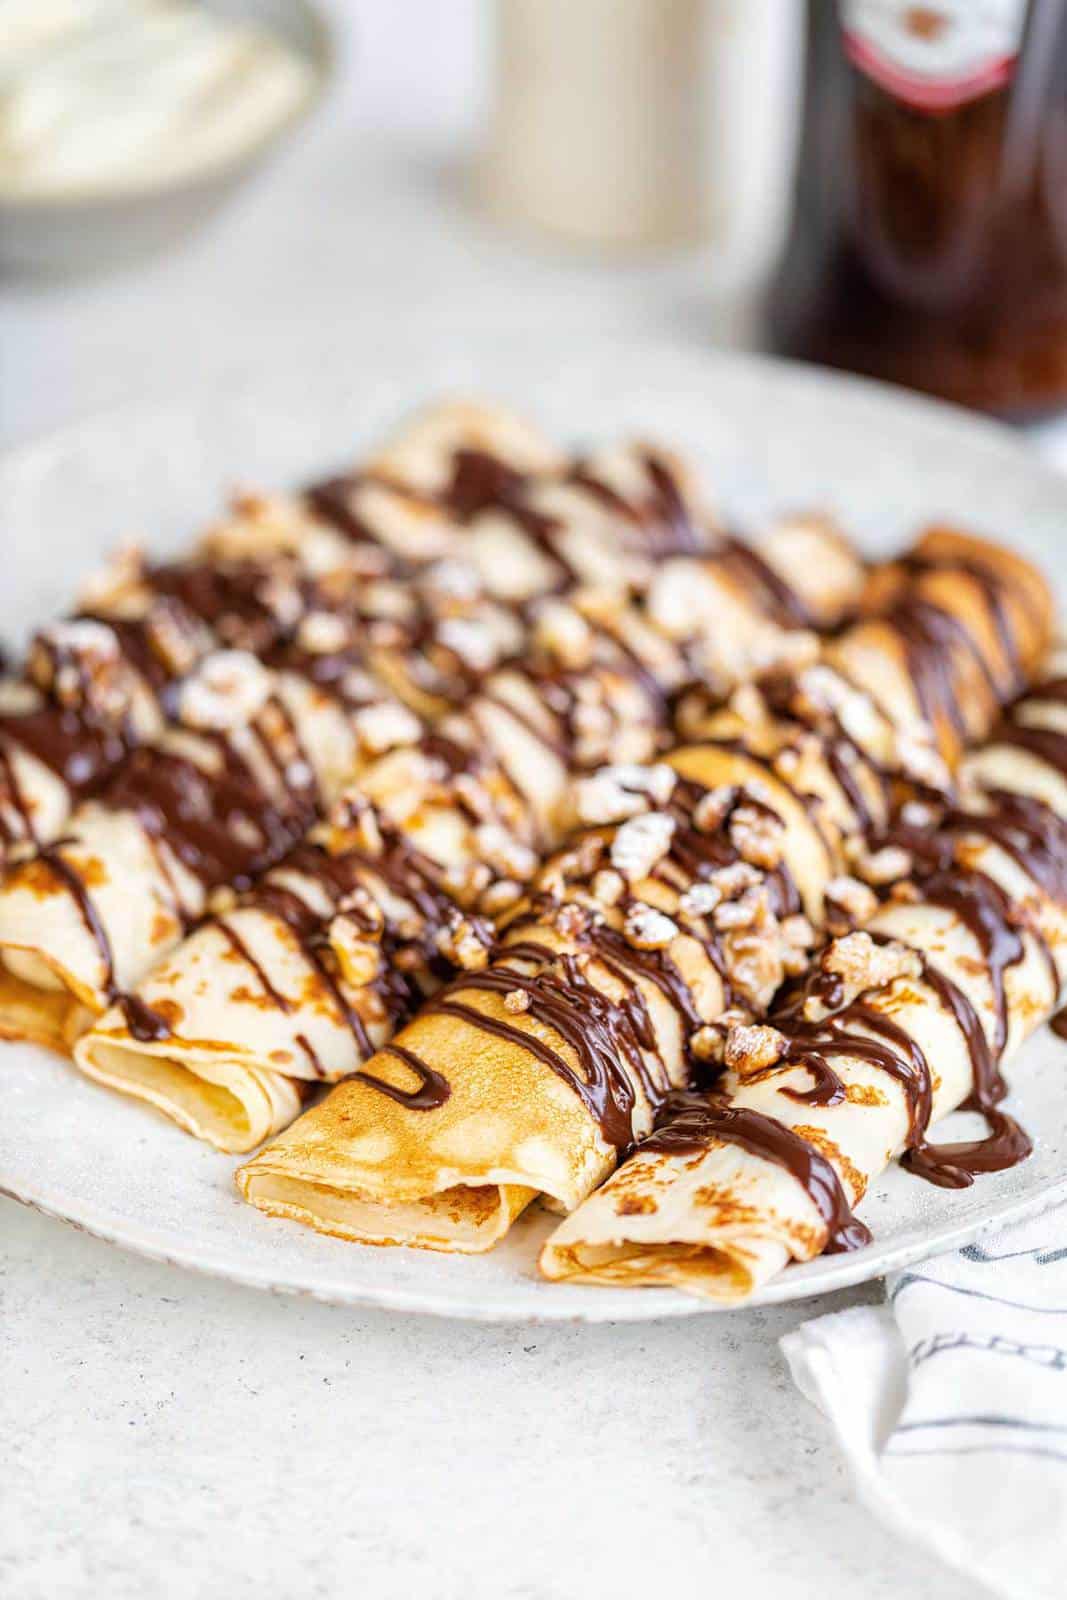 English pancakes filled with double cream and drizzled with chocolate and chopped walnuts